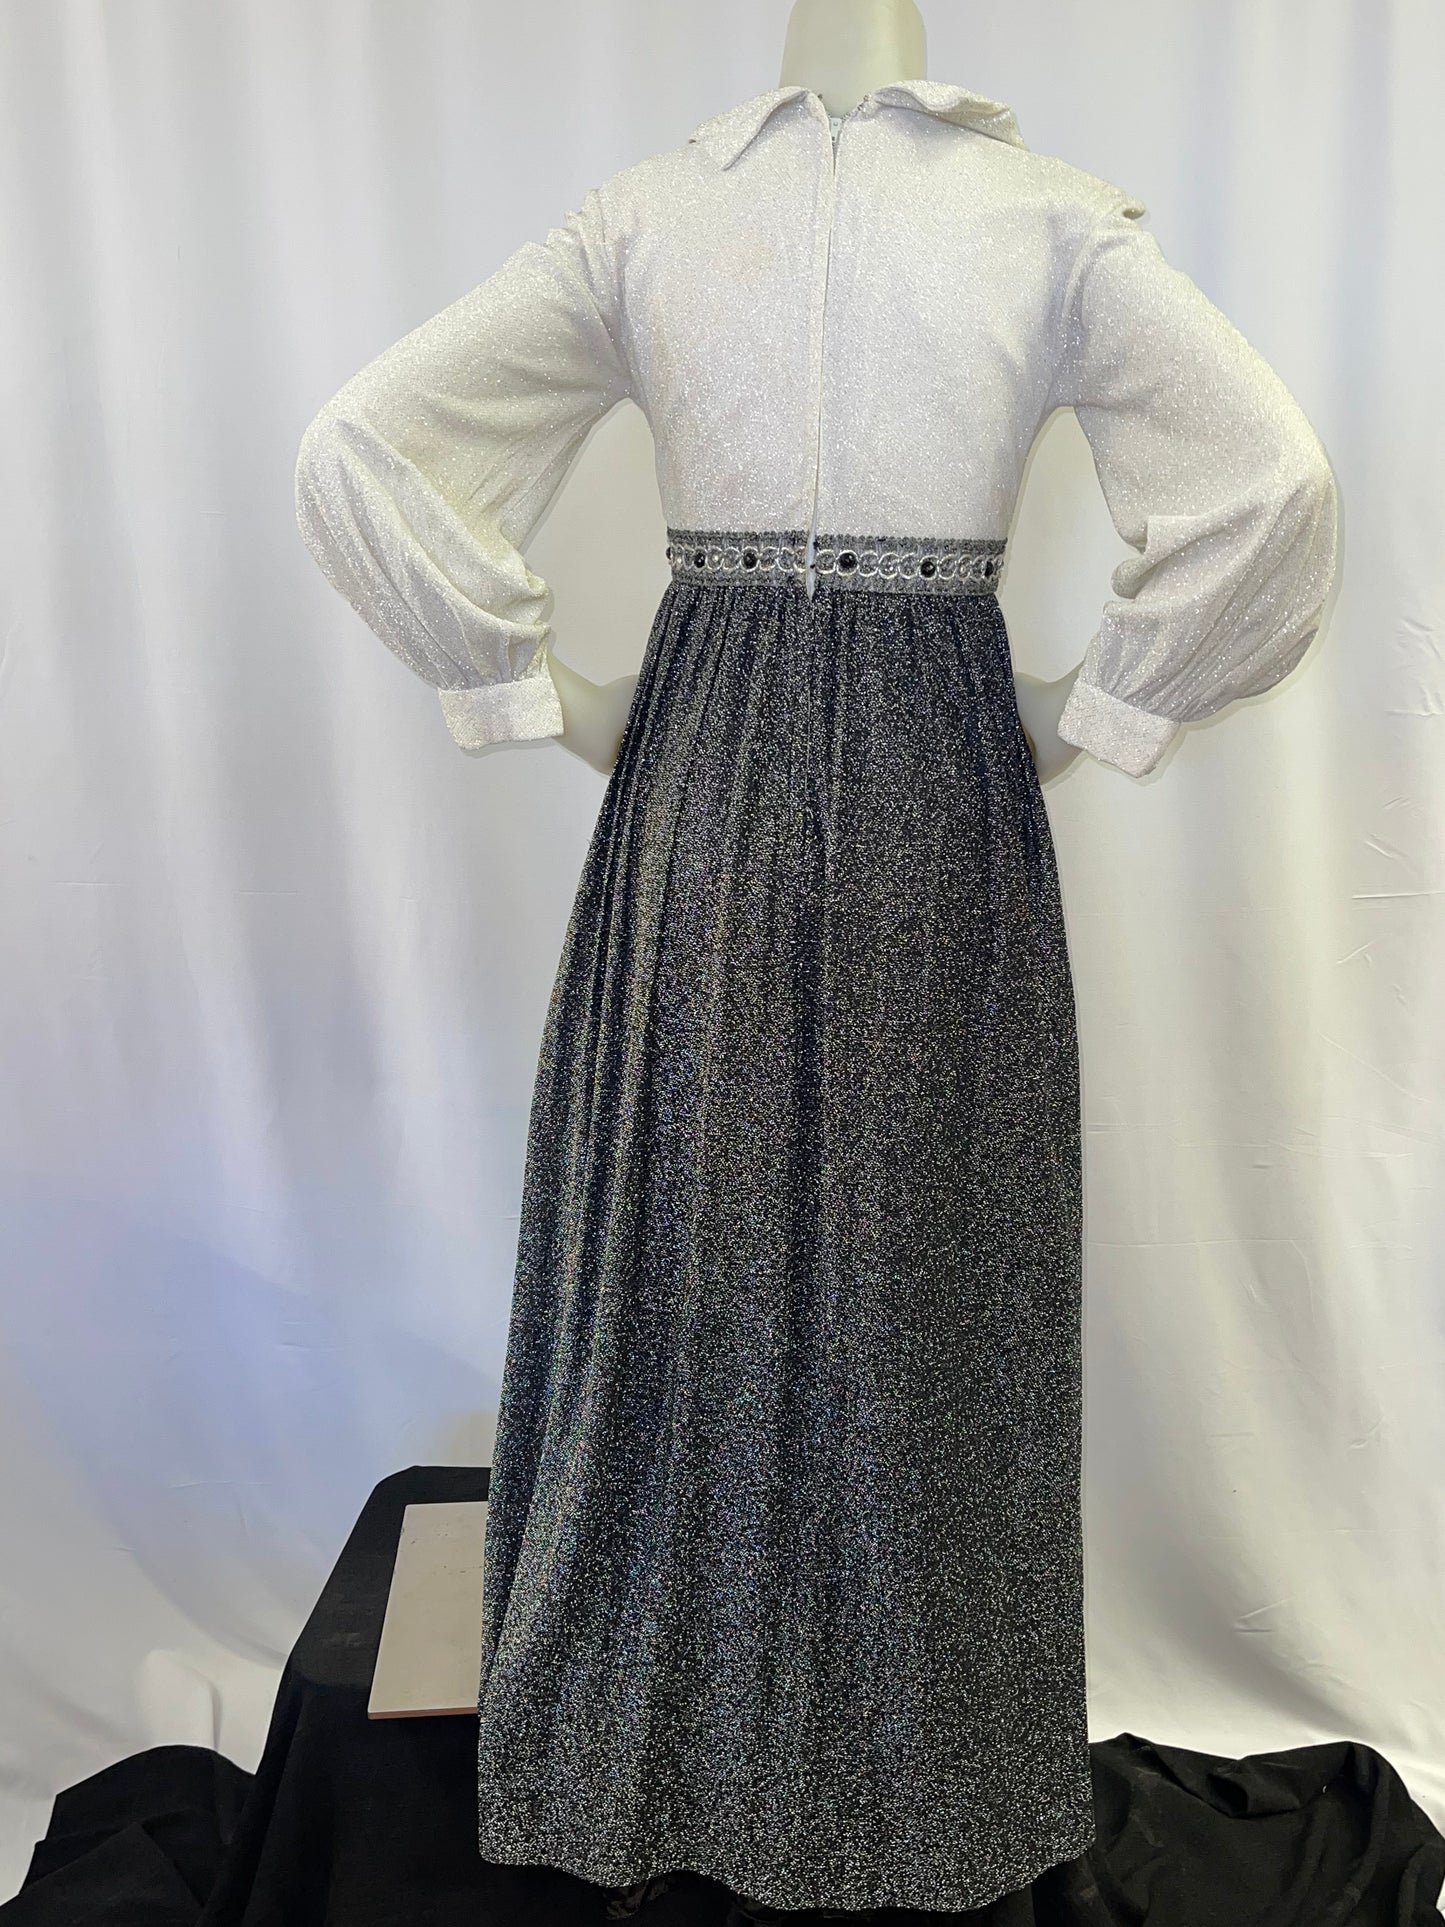 70s White and Black Sparkly Dress